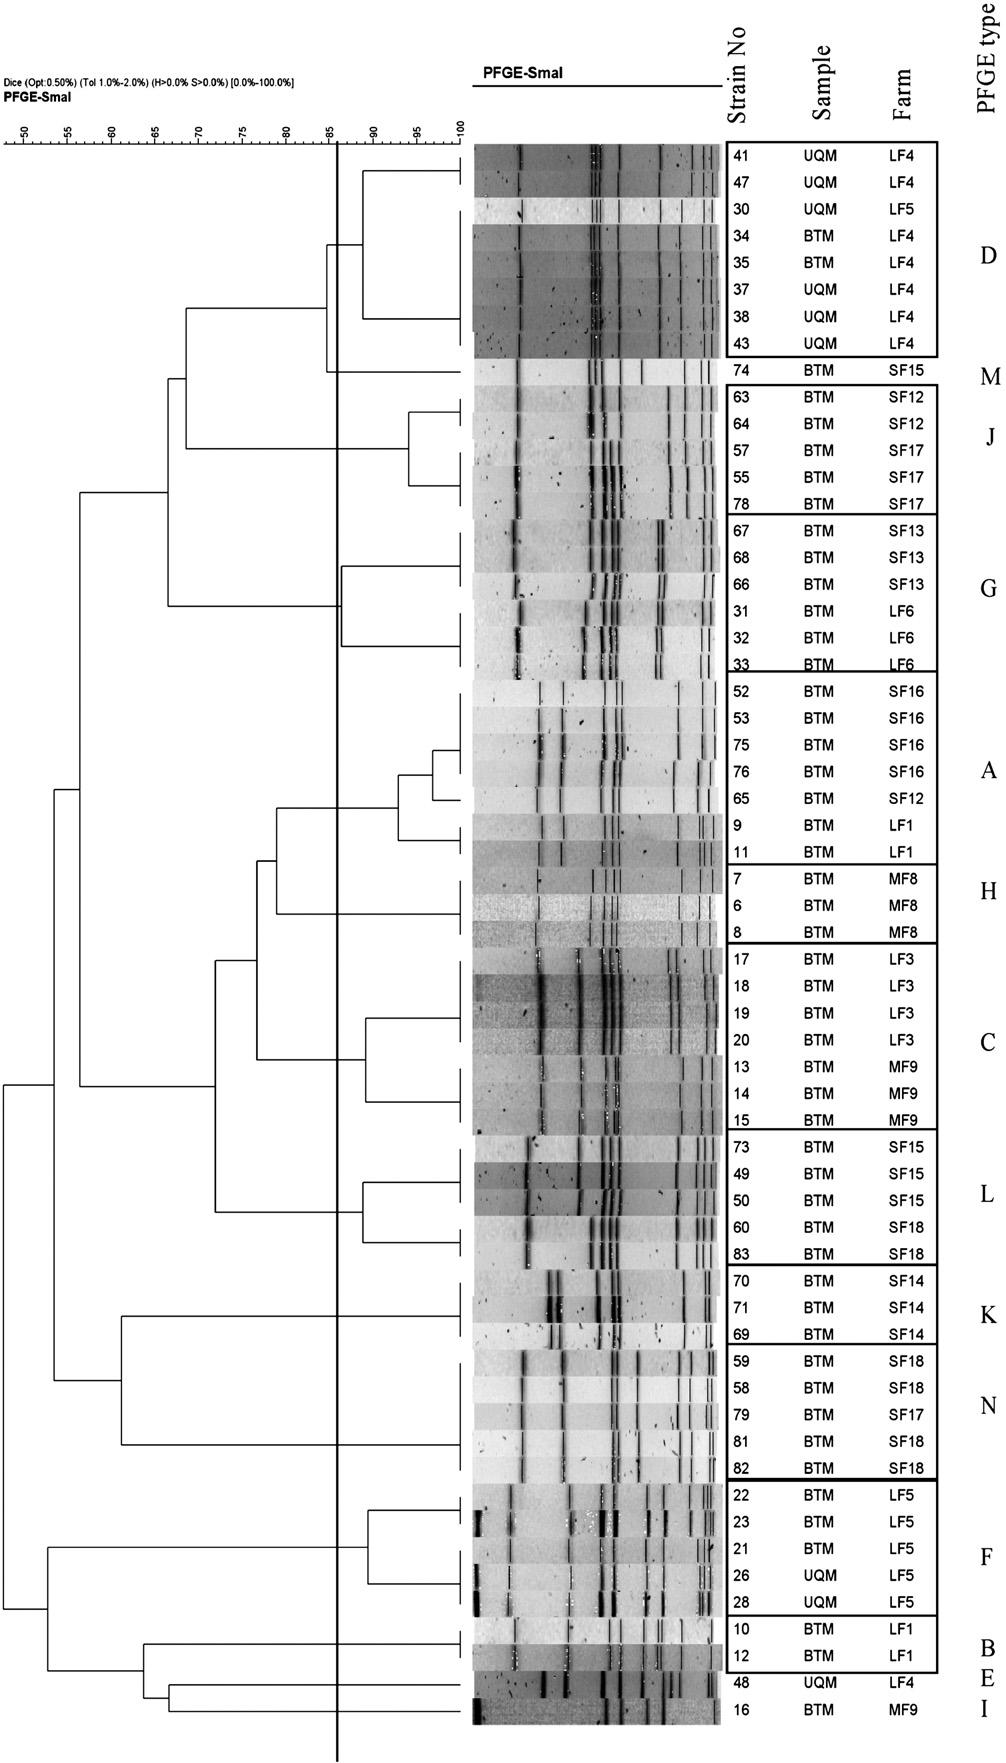 190 F. Peles et al. / International Journal of Food Microbiology 118 (2007) 186 193 Fig. 1. Dendrogram of PFGE patterns showing the relatedness of 59 Staphylococcus aureus strains examined in this study.